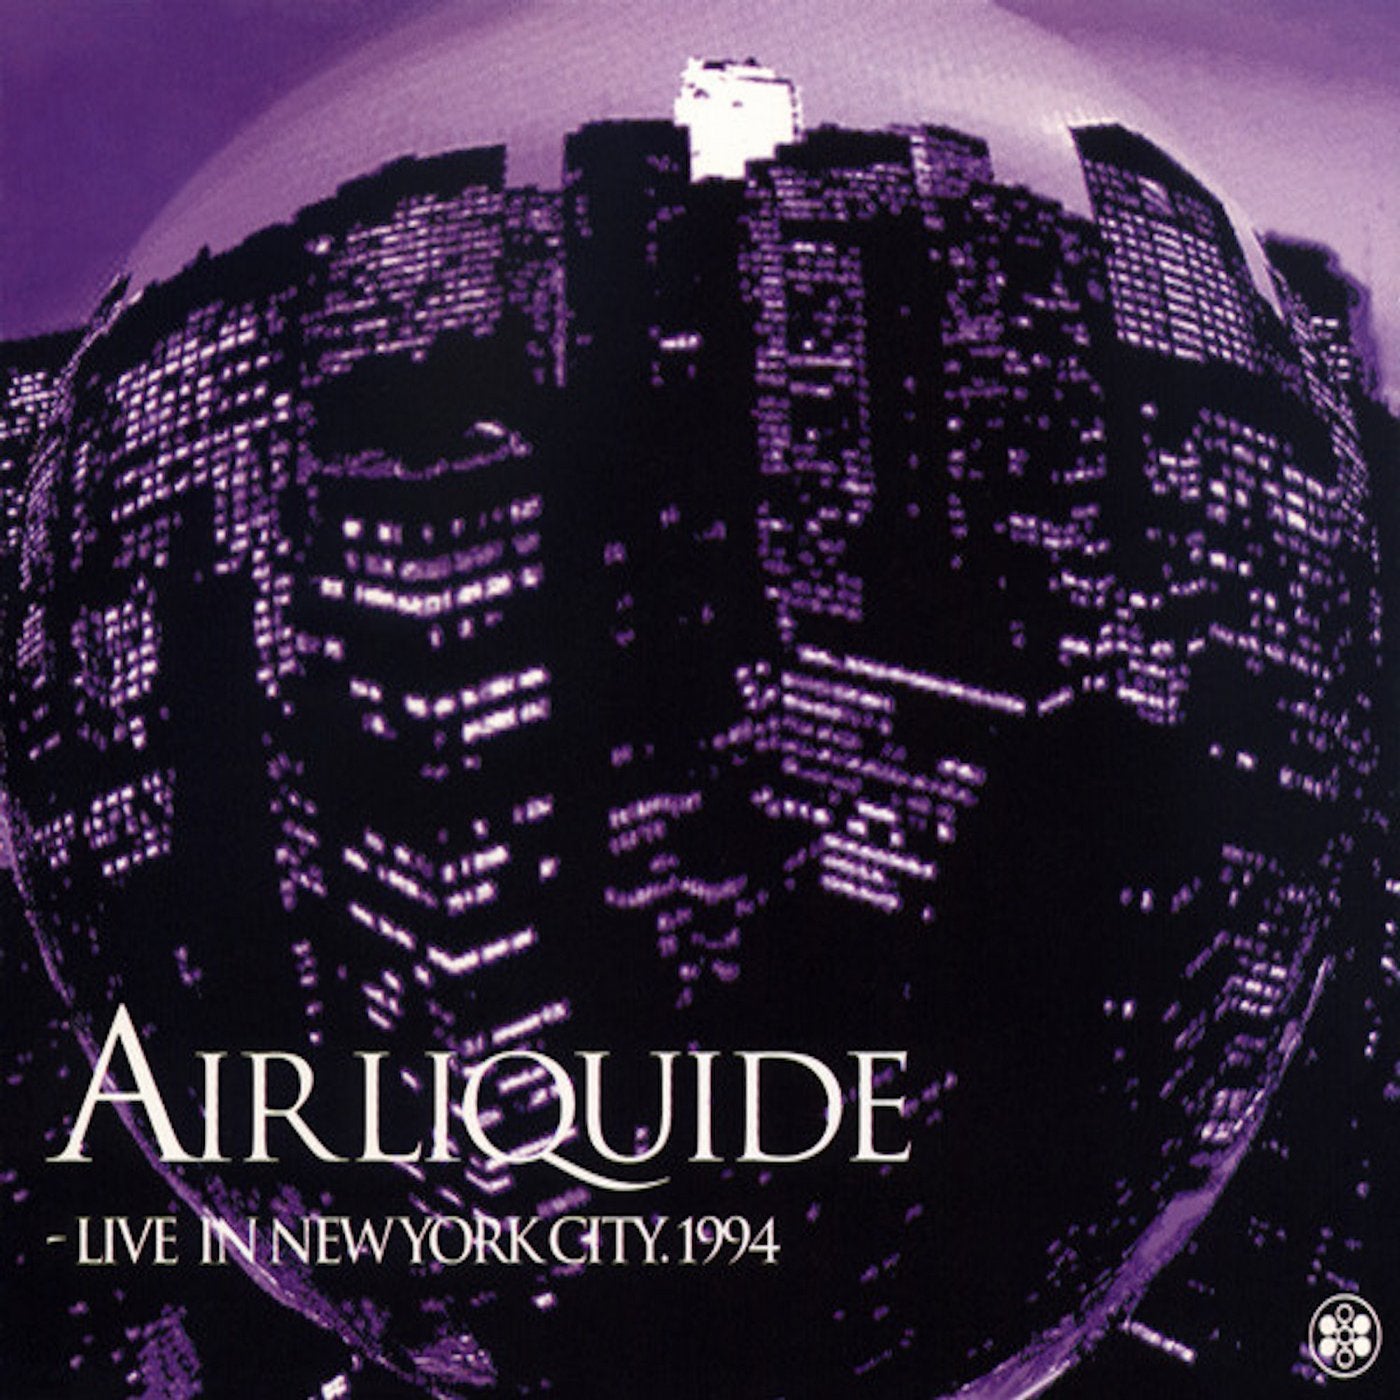 My live in new york. Balldrop in NYC 1994. Living in the City.